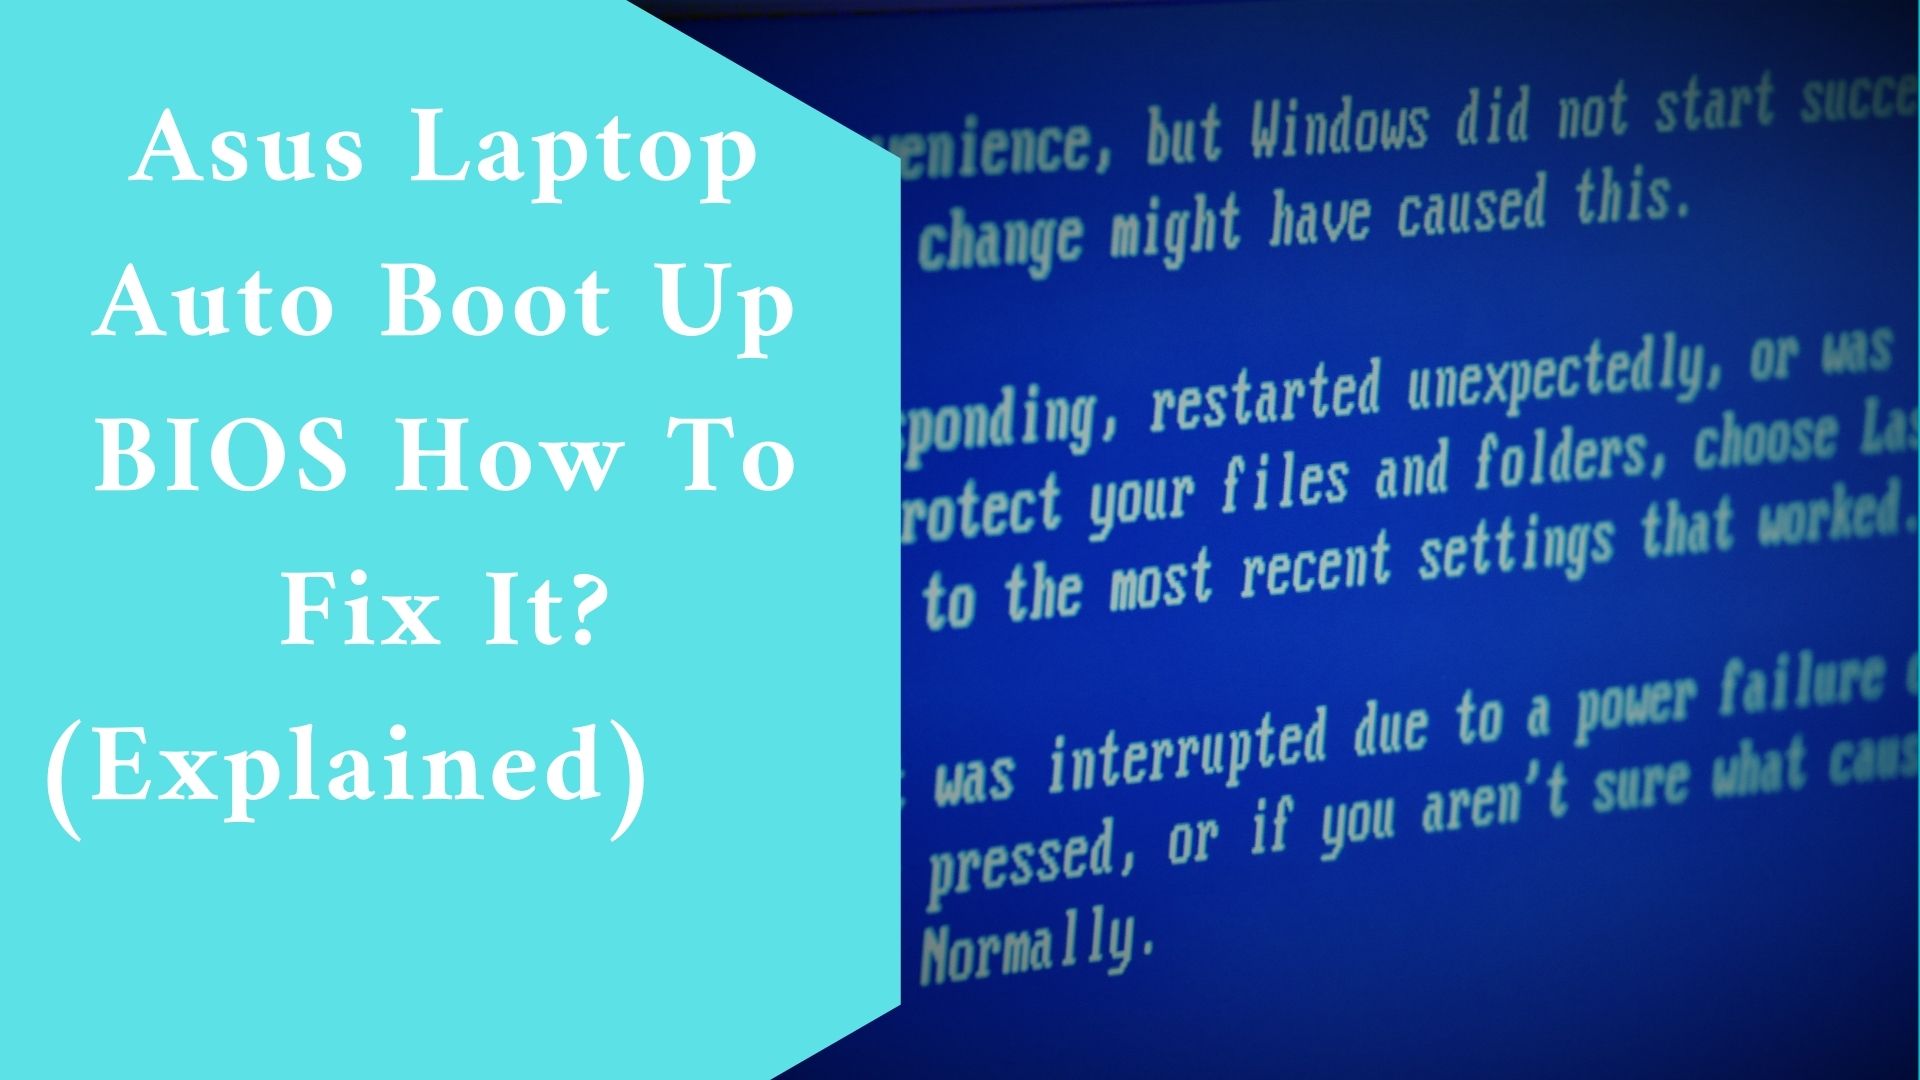 Asus Laptop Auto Boot Up BIOS How To Fix It? (Explained)